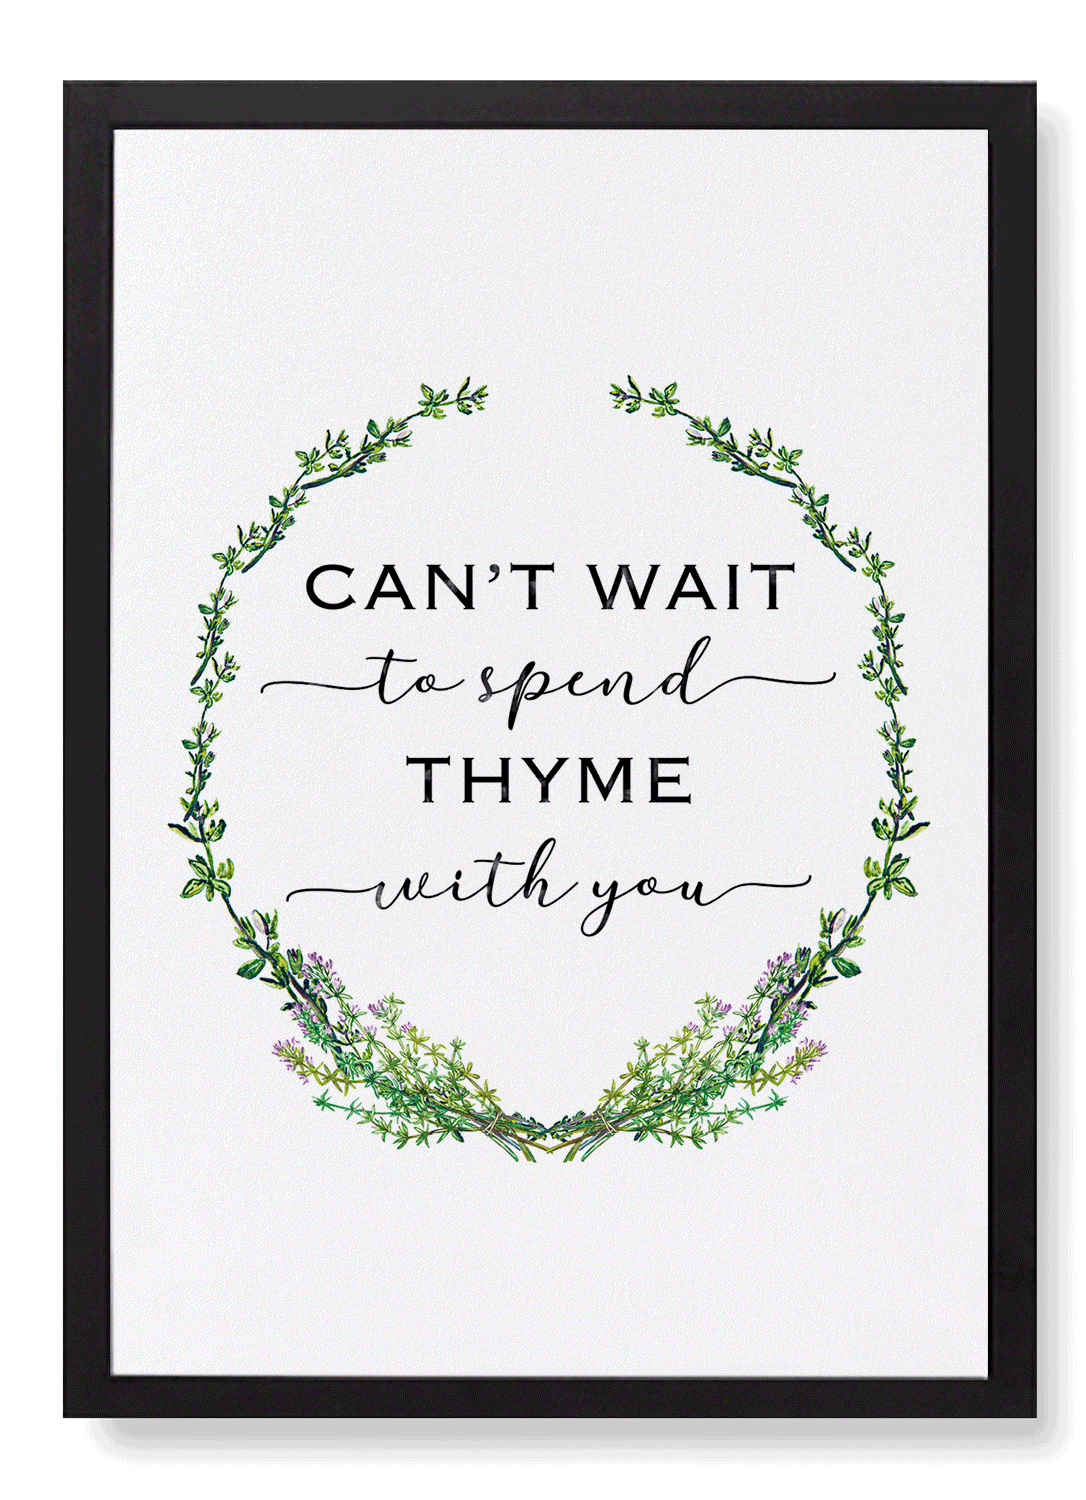 SPEND THYME WITH YOU